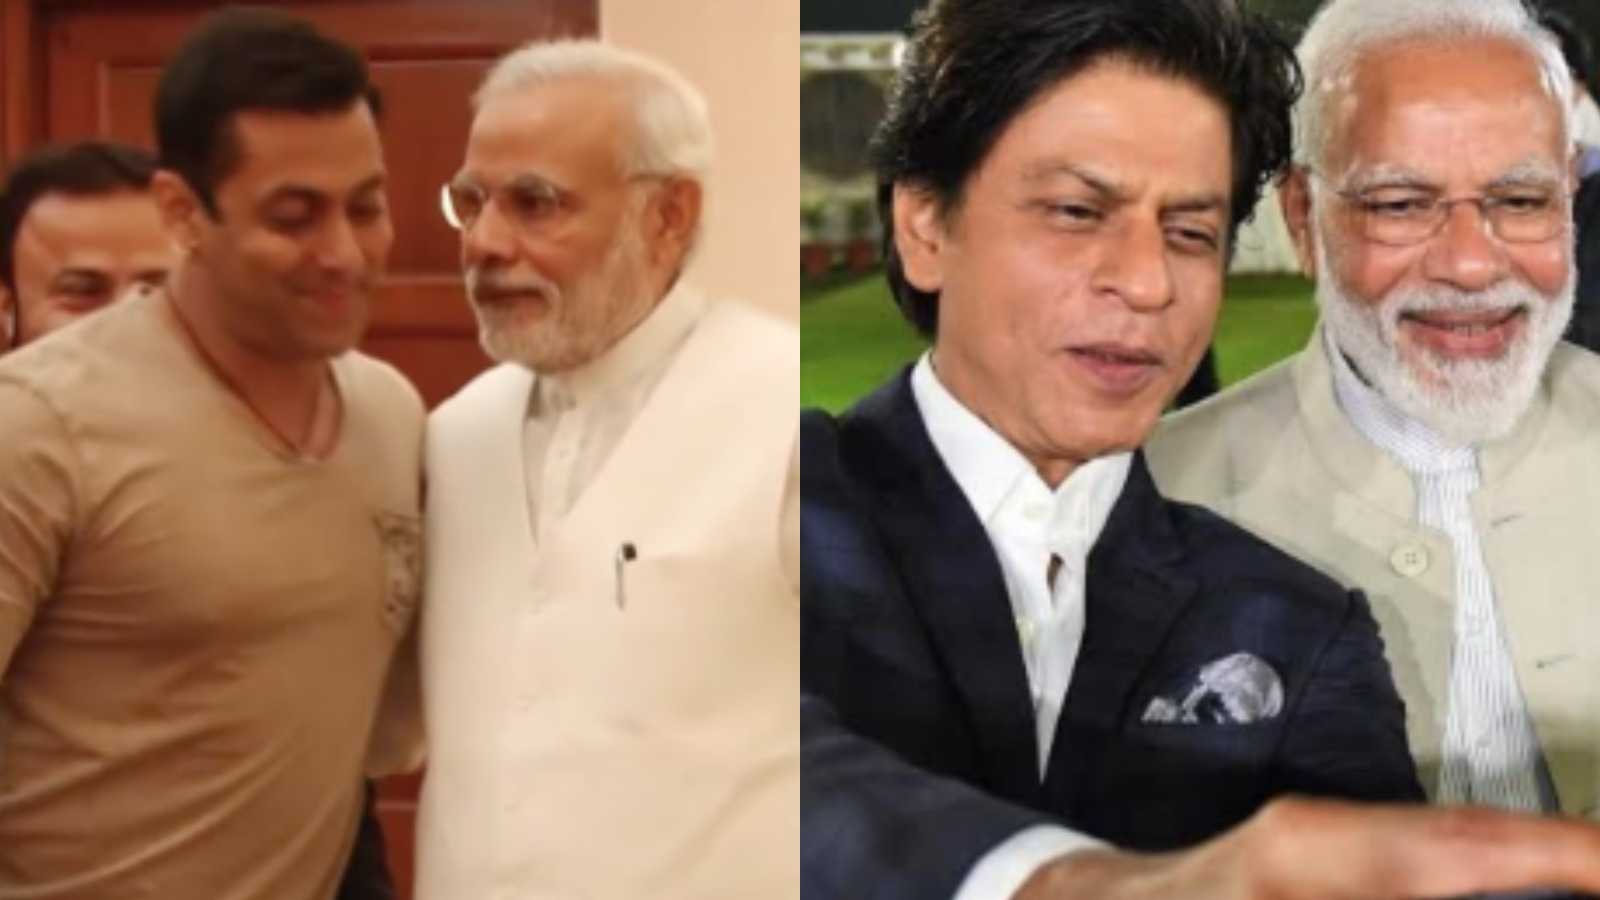 Prime Minister Narendra Modi's birthday: Shah Rukh Khan, Salman Khan and others extend warm wishes to the exemplary leader